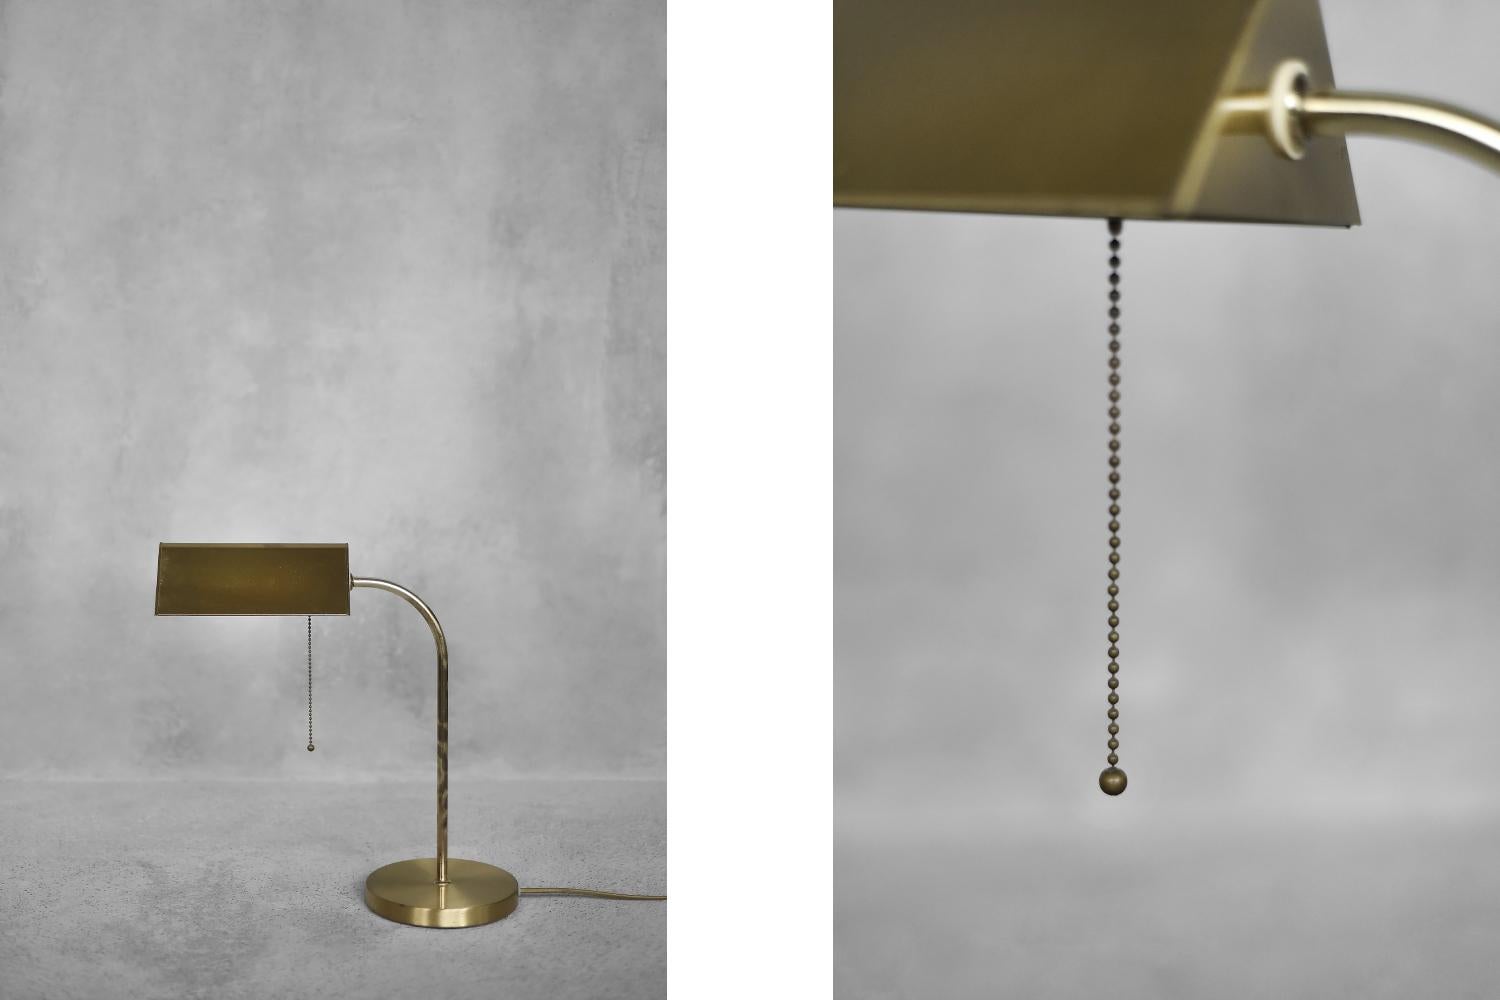 This elegant, brass banker-type desk lamp was produced by the German manufacturer Karstadt AG in the 1970s. It is made of brushed brass with a truly classic look. It has a geometric lampshade with an inclined shape. The switch is placed on a metal